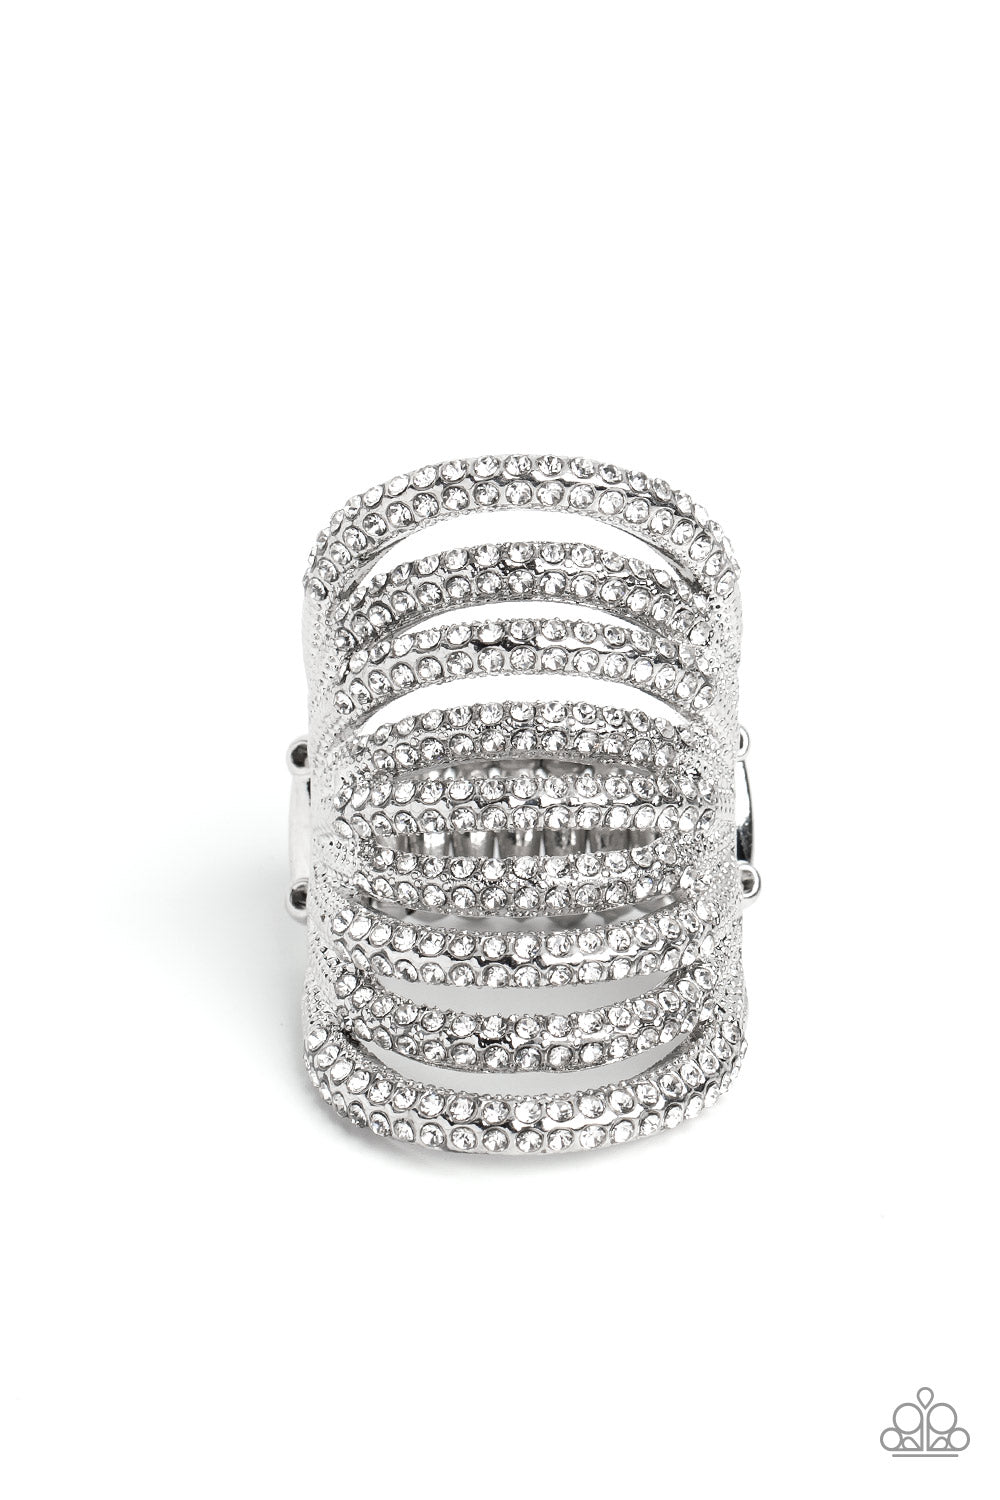 Paparazzi Accessories Rippling Rarity - White An elongated silver frame, lined with dainty white rhinestones, creates the illusion of endless sparkle as it stacks up the finger. Encrusted in two rows across each silver band as it arcs across the finger, t